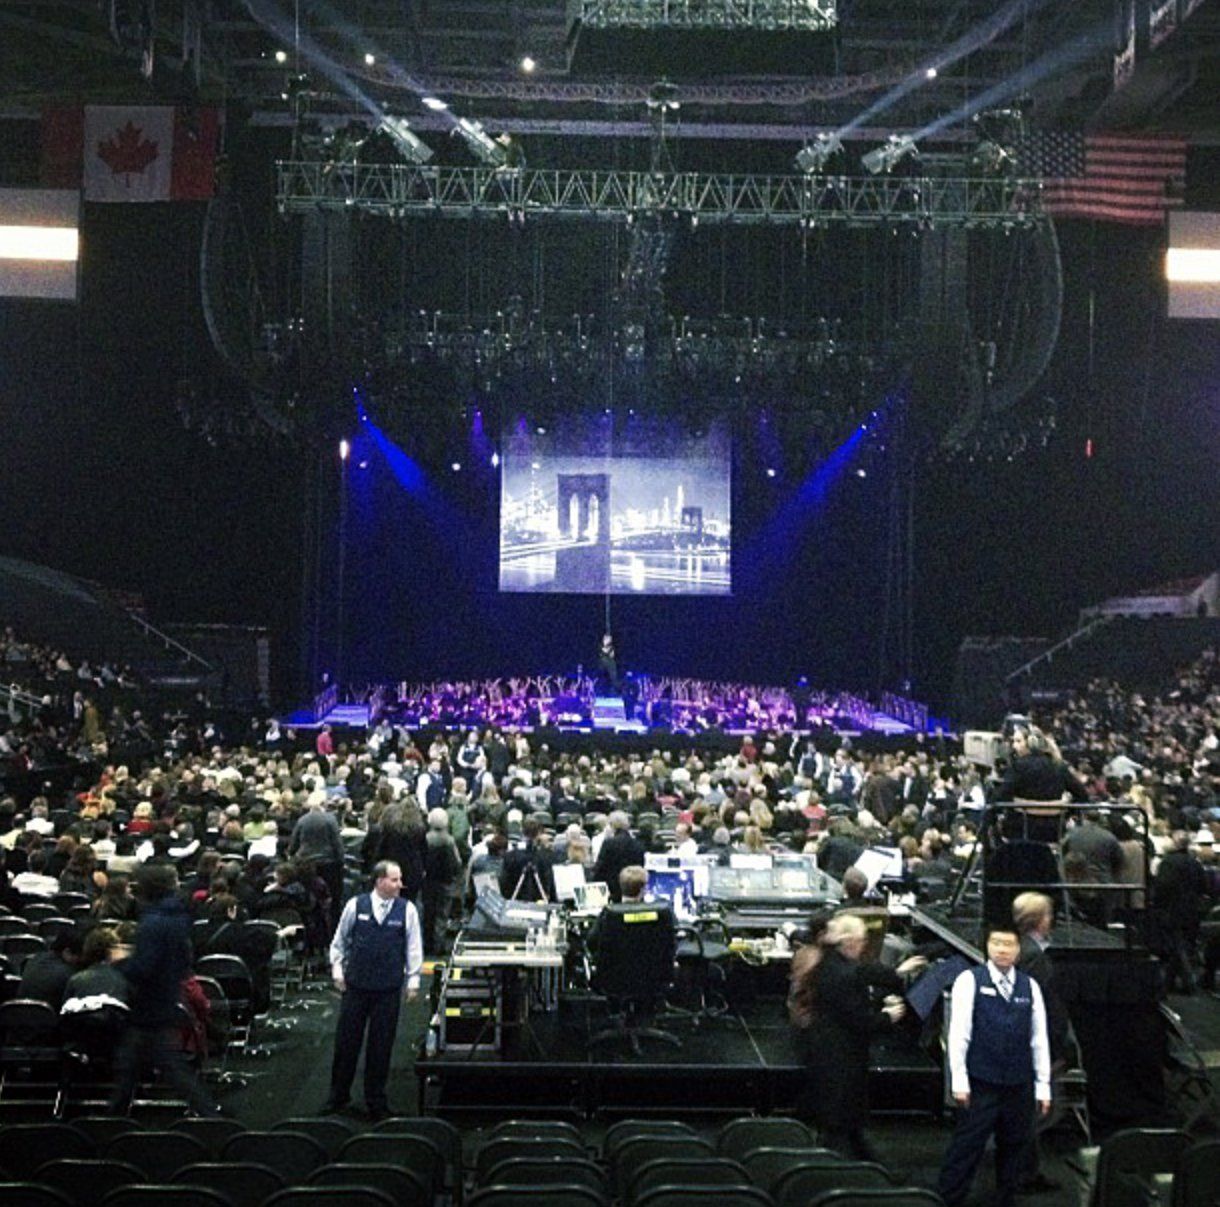 Fan photo of the Toronto stage